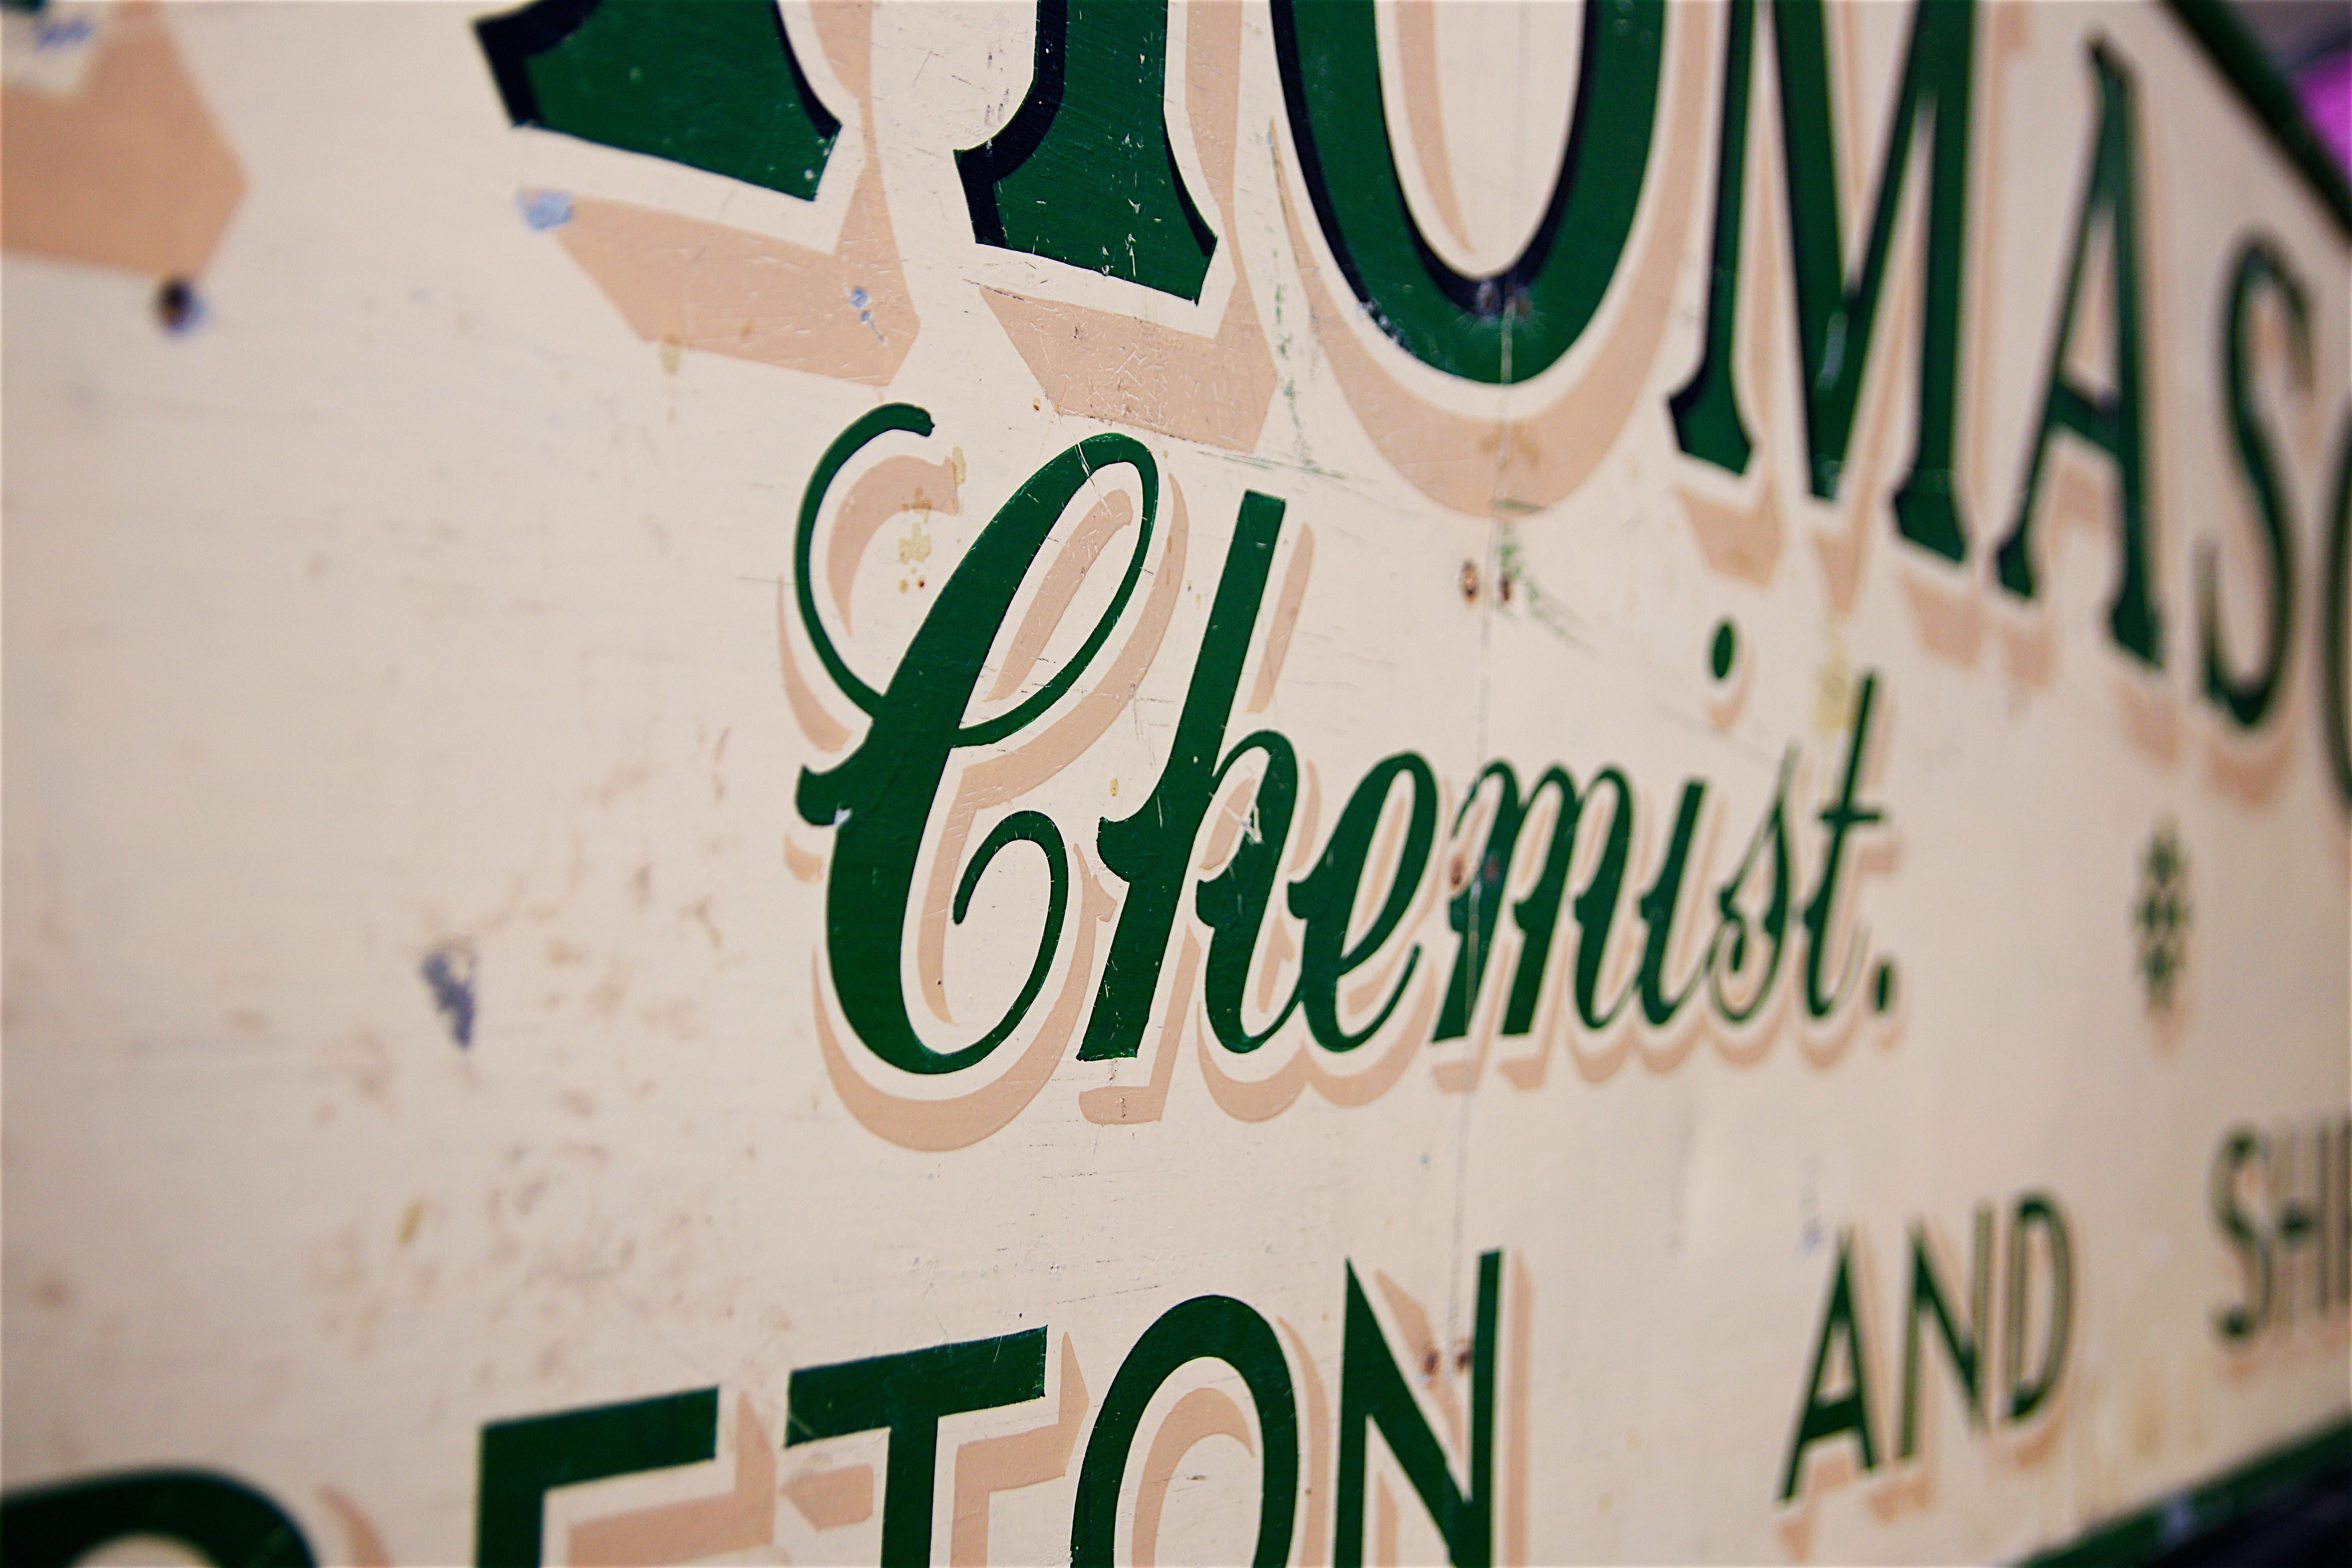 A 20th century painted metal and wood shop fascia sign for “A.F. Thomason, Chemist, Campden, Moreton and Shipston” painted green on cream.